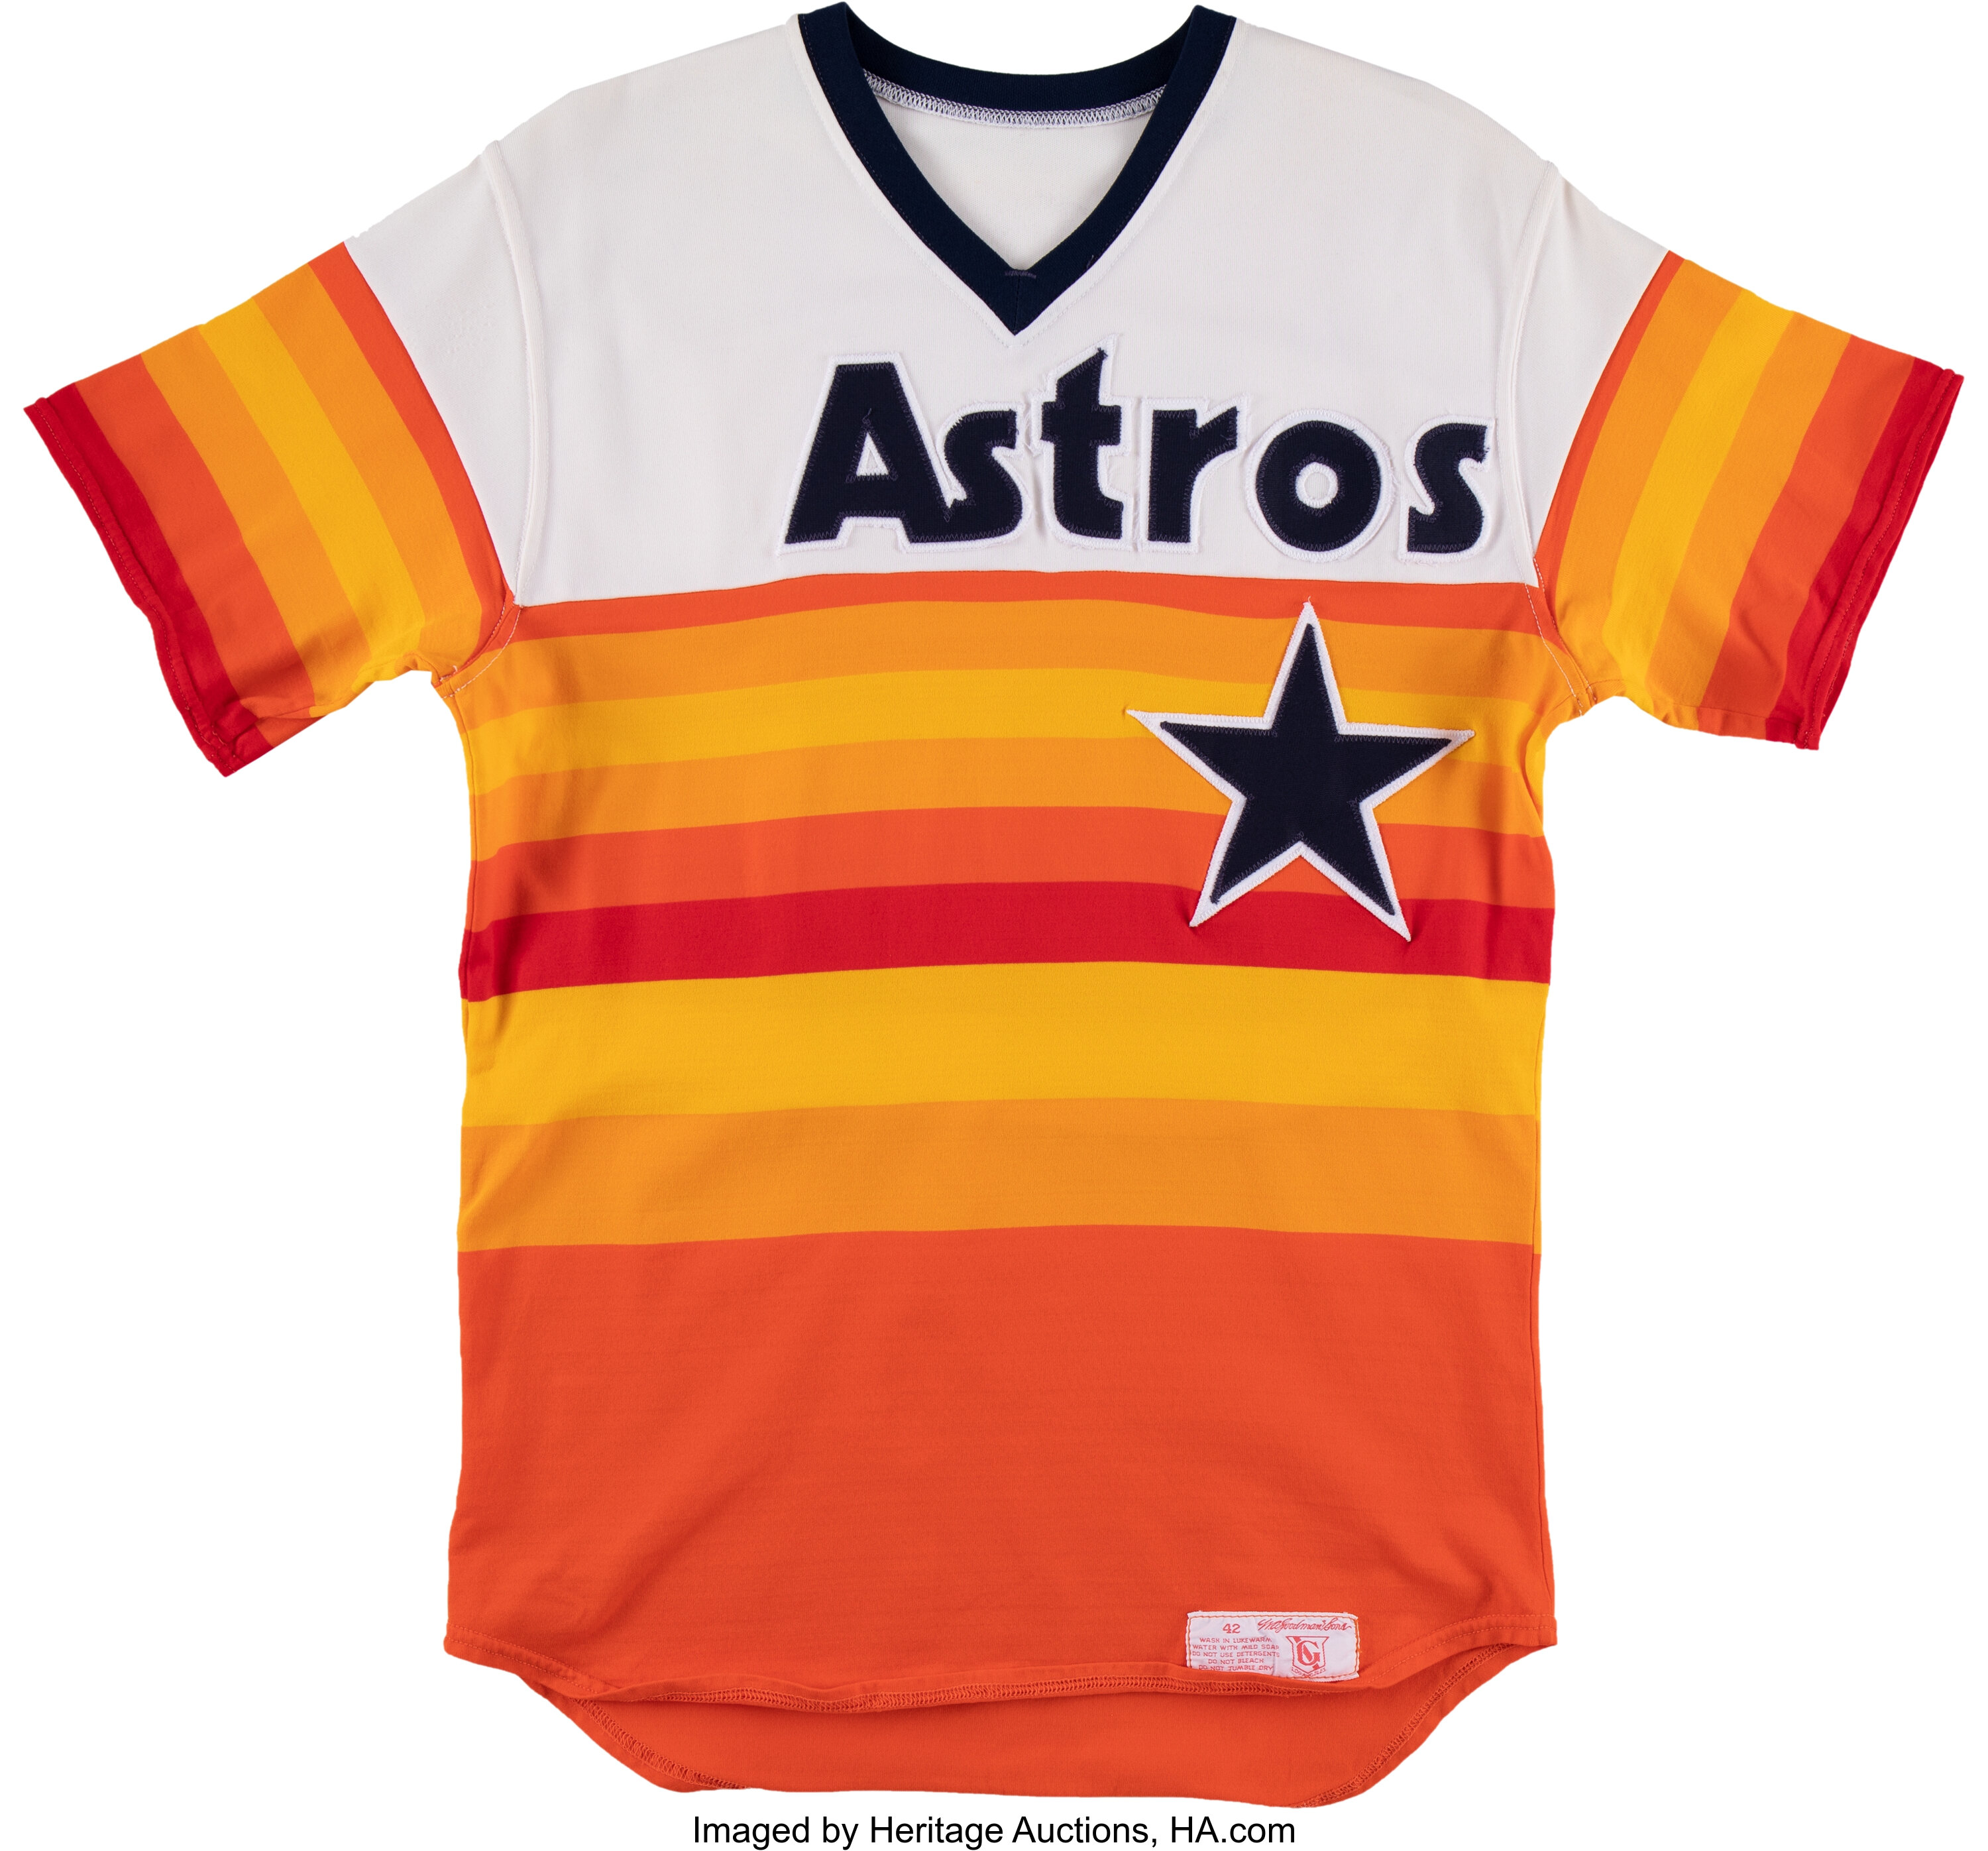 Terry Puhl 1986 Houston Astros Rainbow Cooperstown Jersey w/ All Star Patch